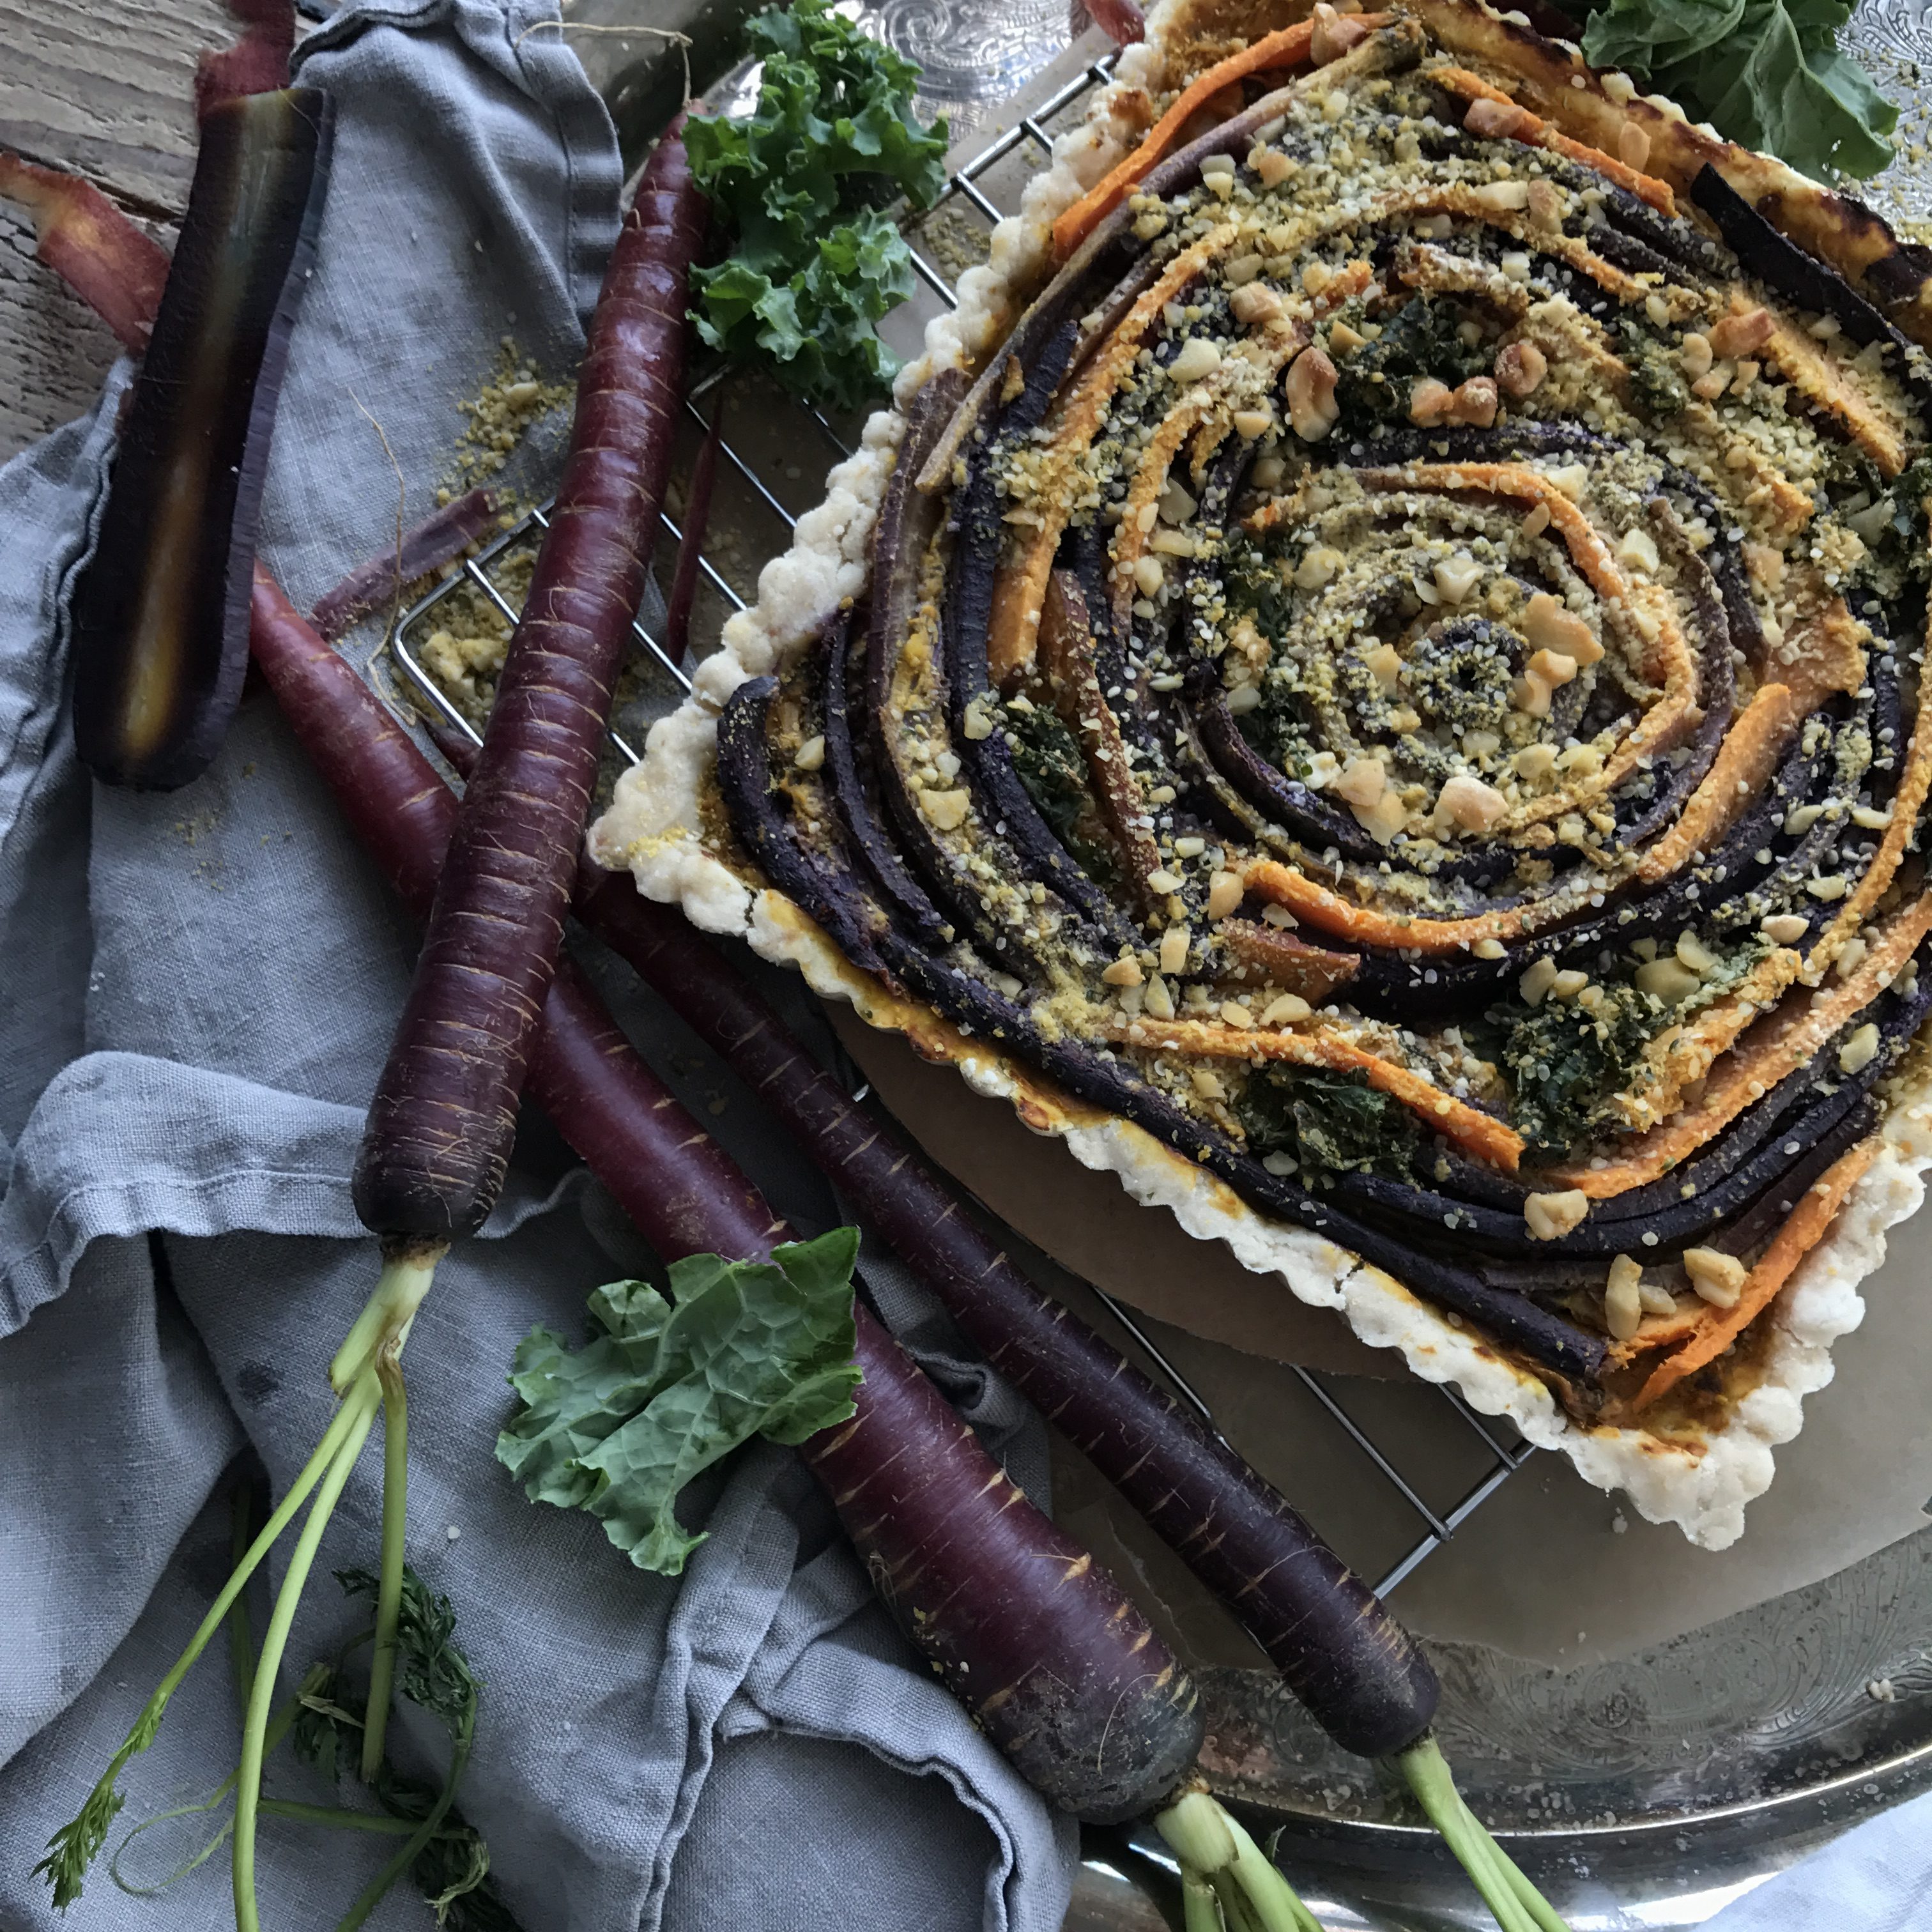 Winter Vegetable Tart with Cashew Crumble and Balsamic Glaze